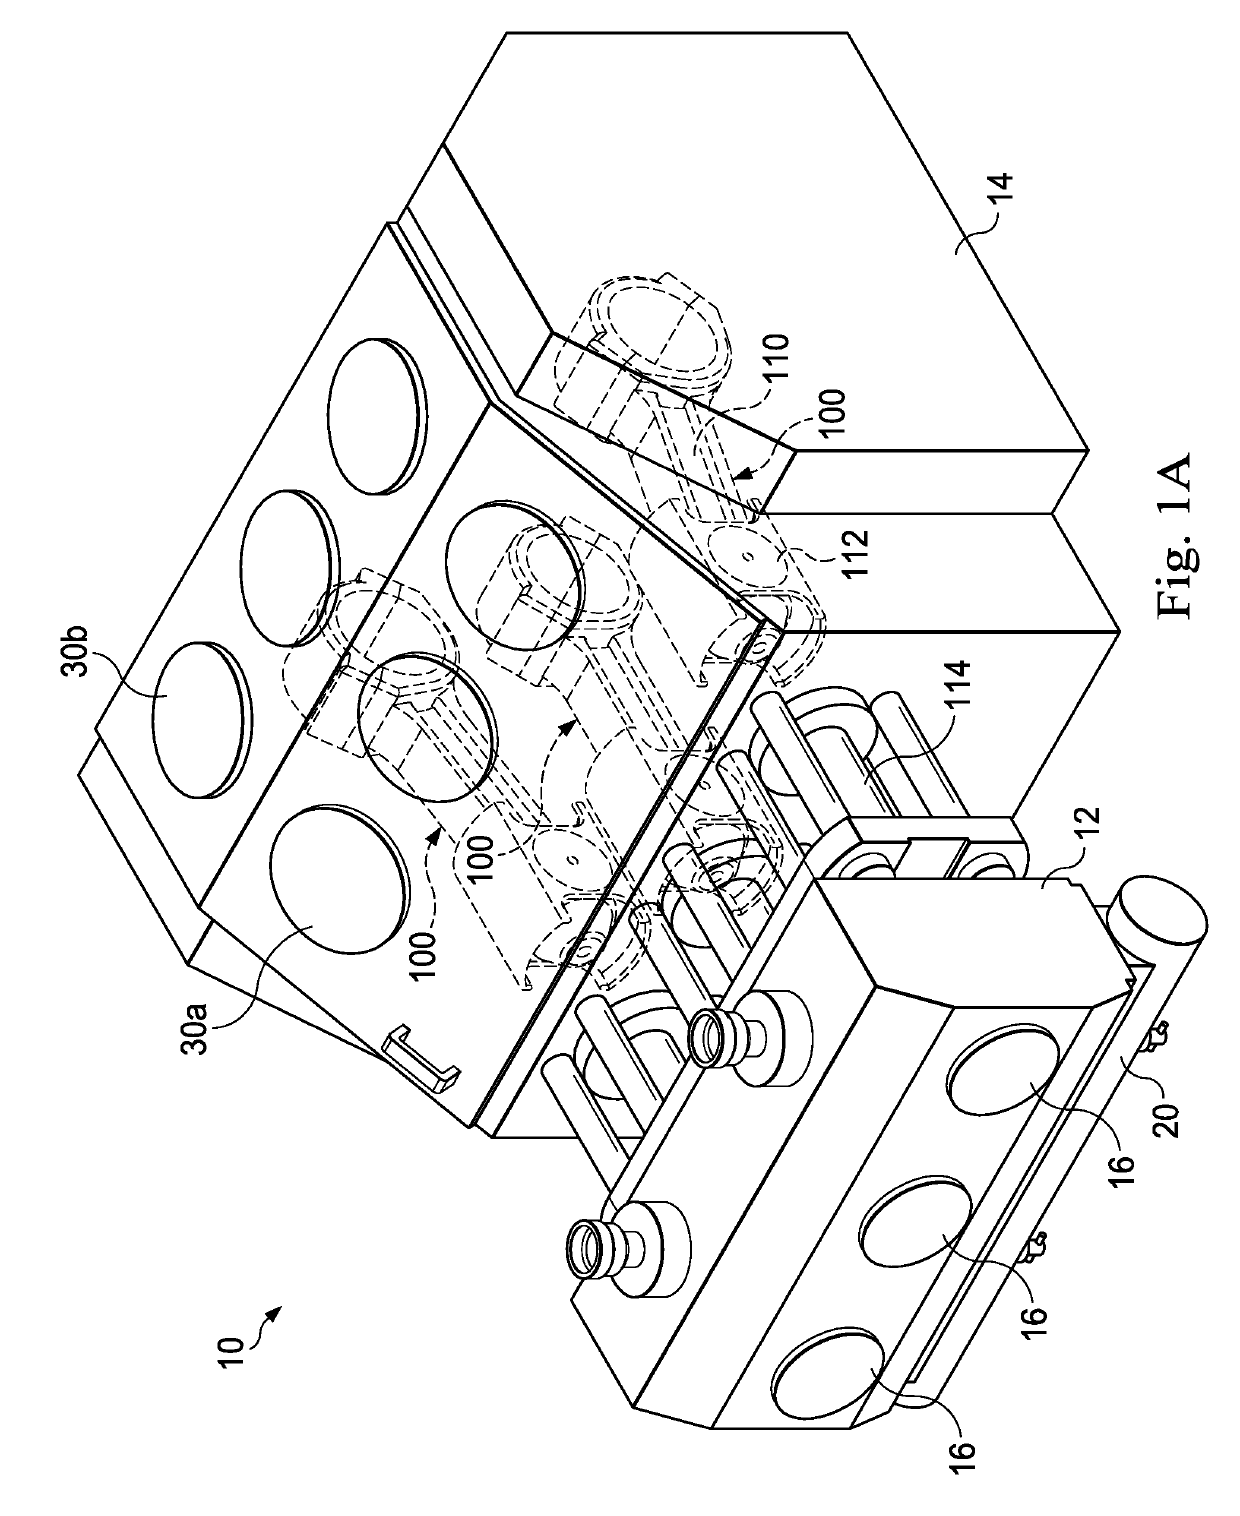 Connecting rod and crosshead assembly for enhancing the performance of a reciprocating pump